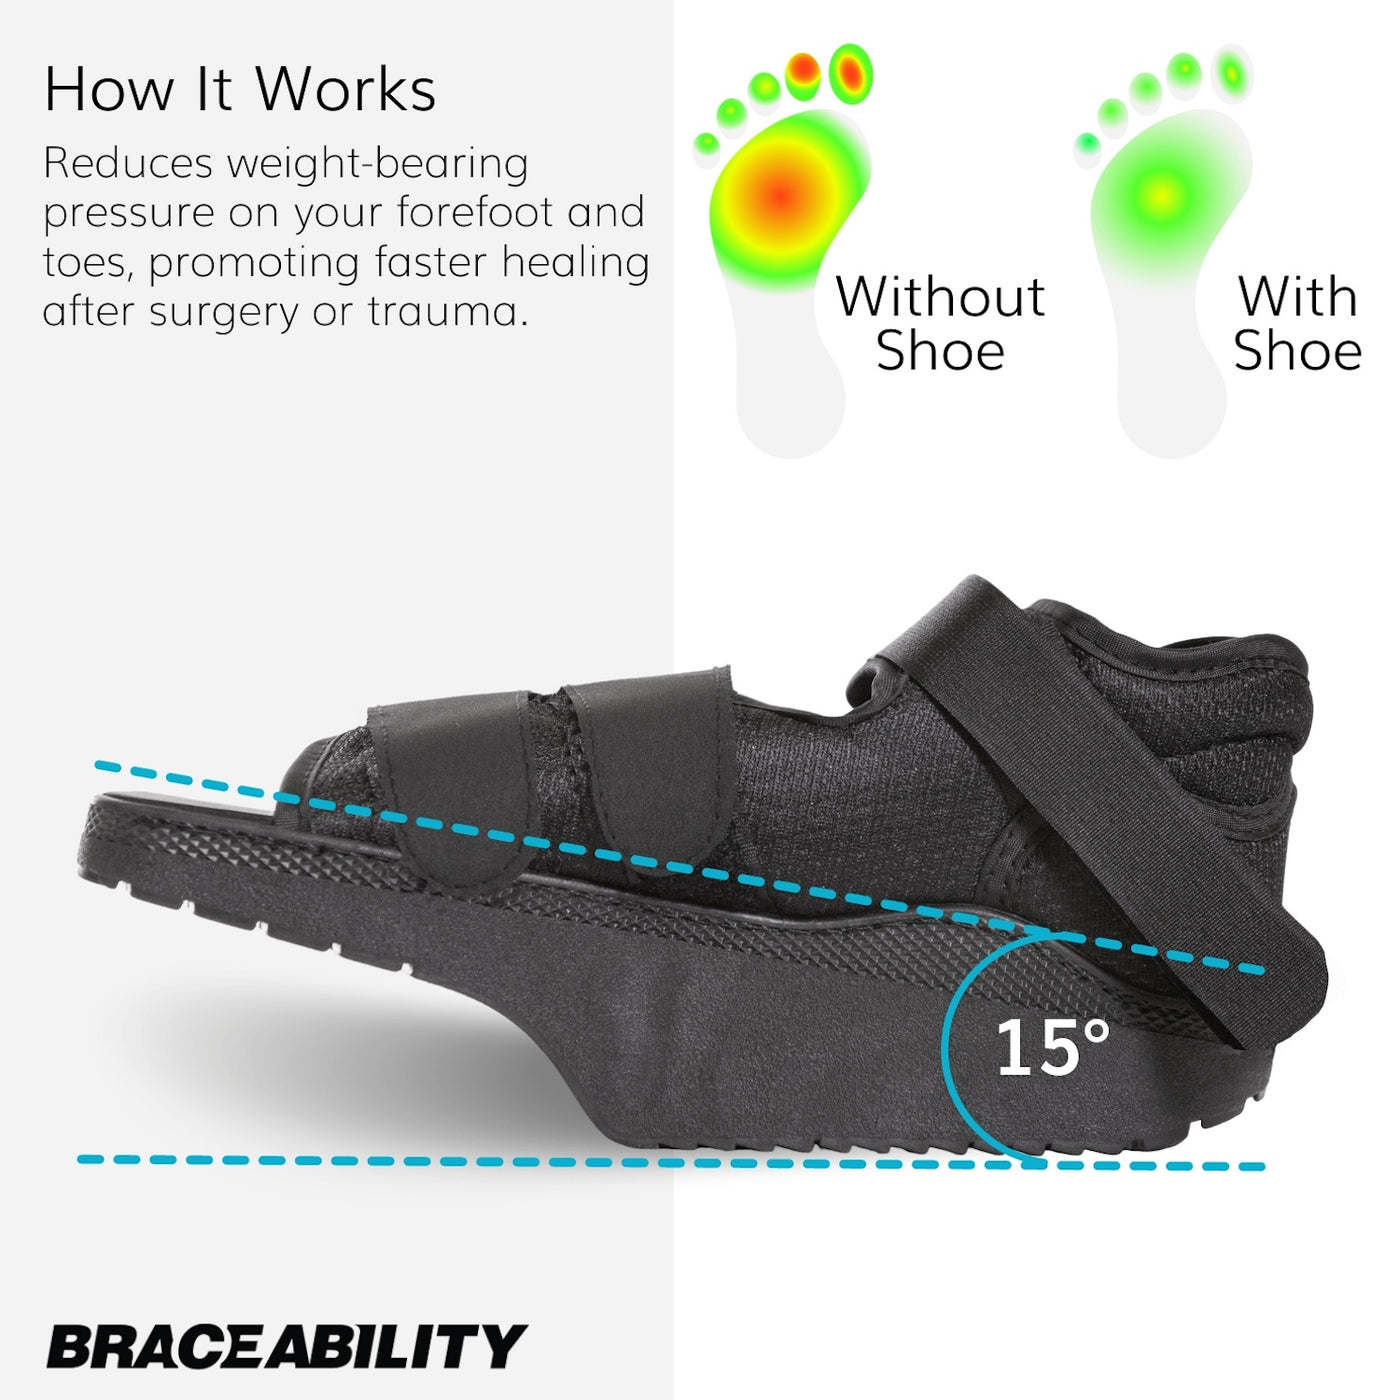 Our toe offloading shoe has an orthowedge that shifts your weight back at a 15 degree angle